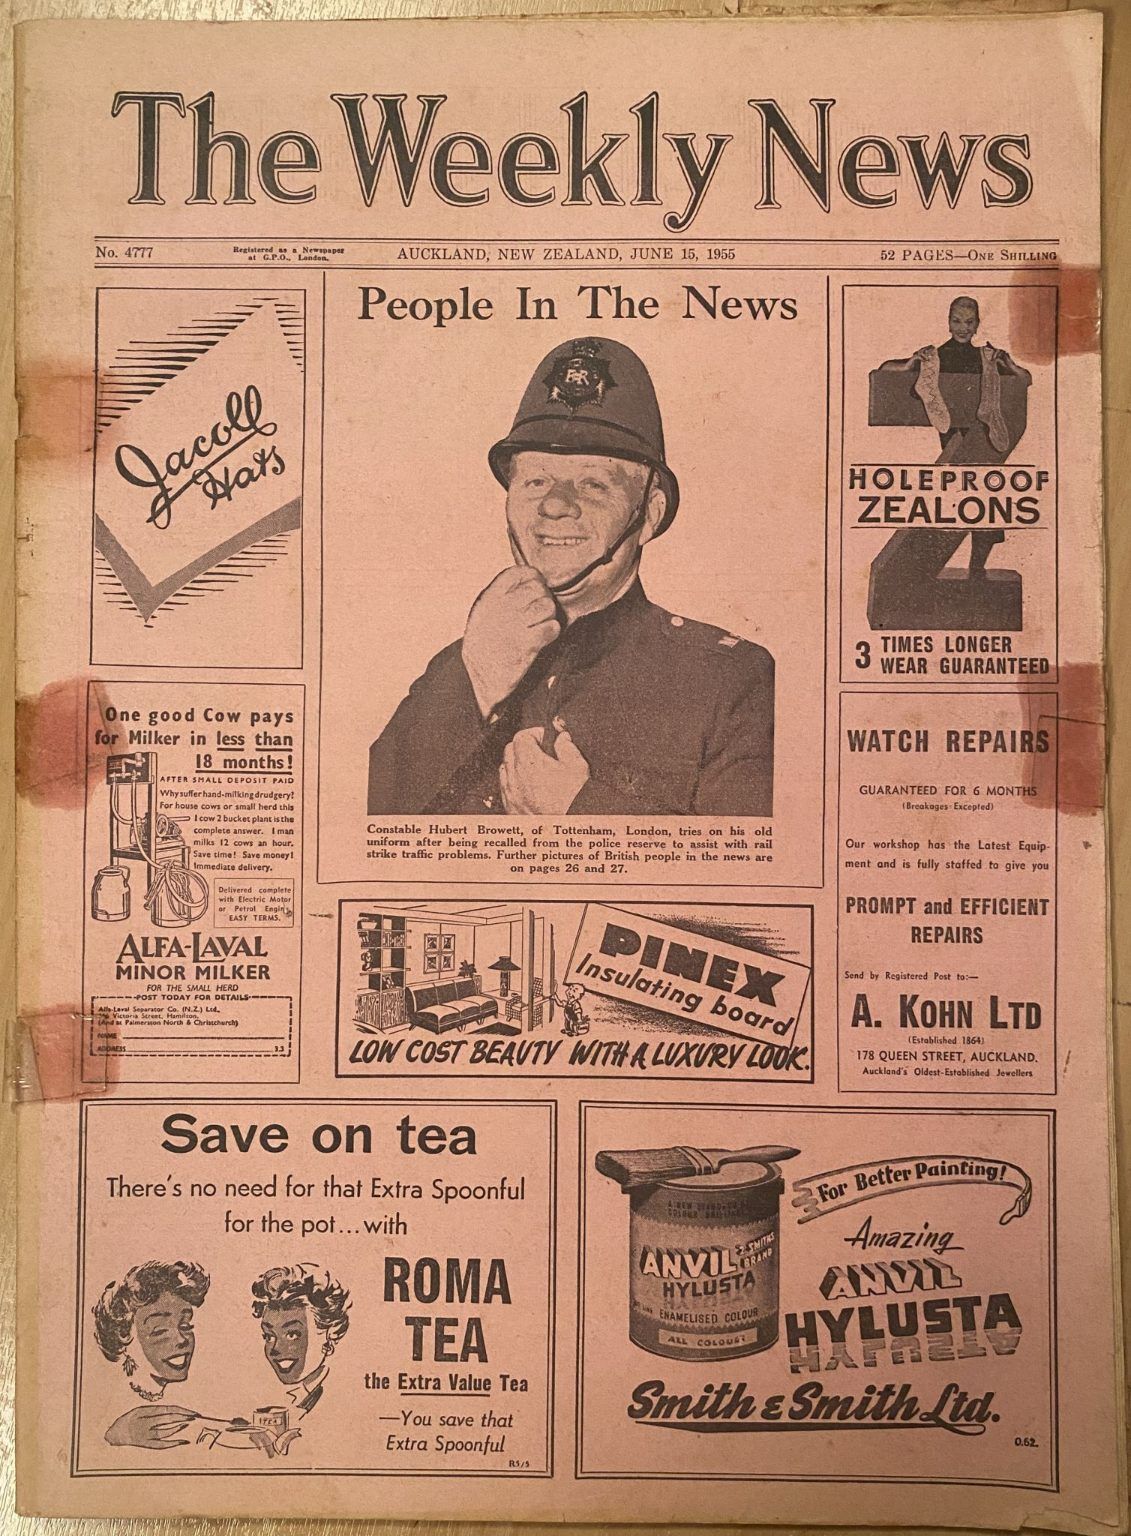 OLD NEWSPAPER: The Weekly News - No. 4777, 15 June 1955